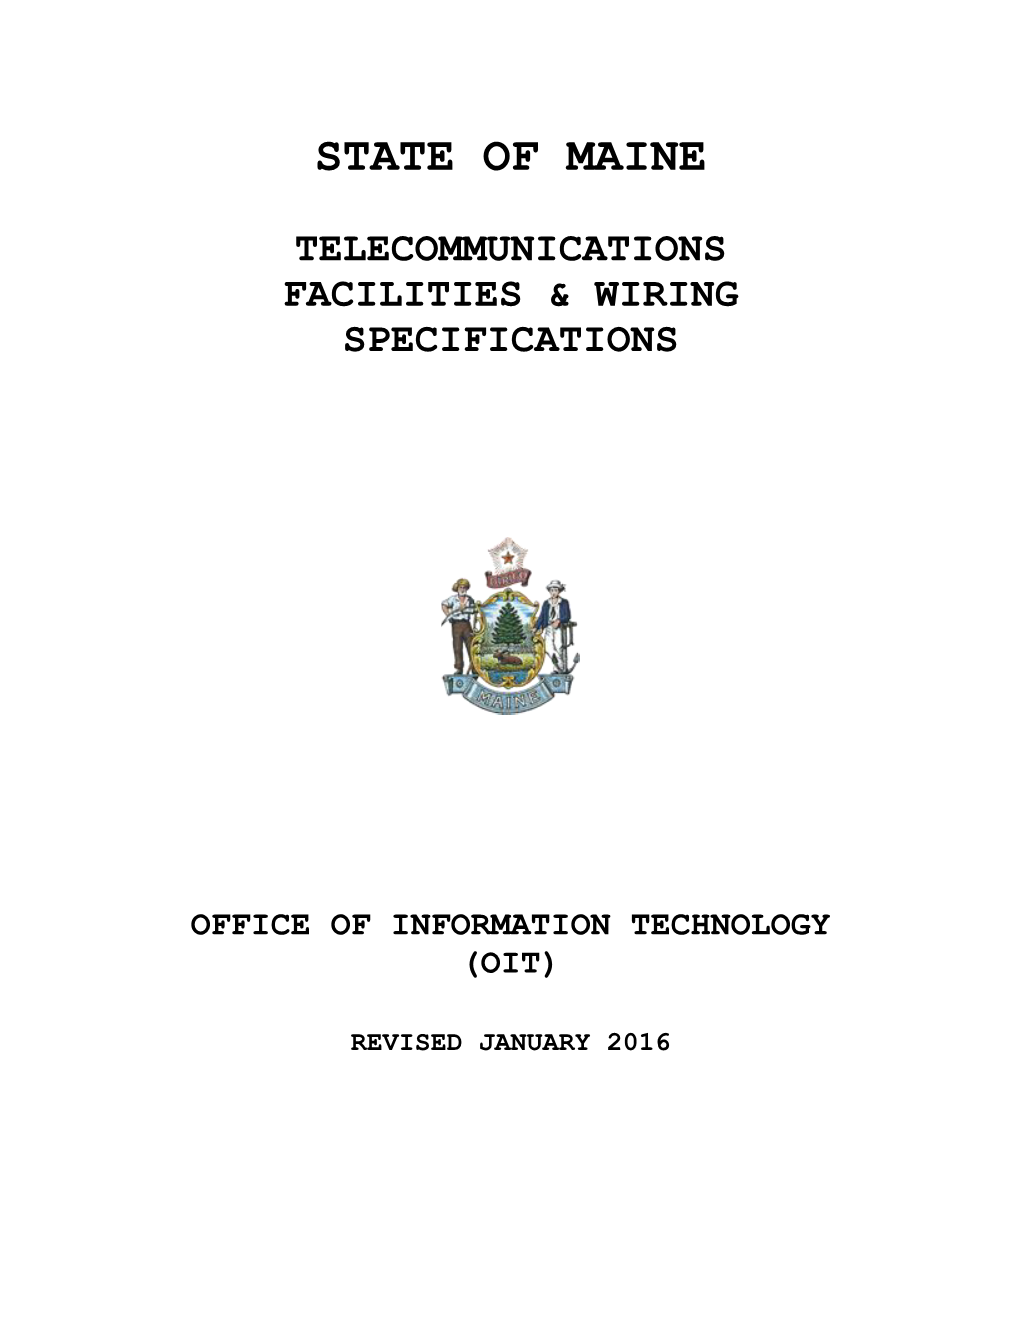 Telecommunications Facilities & Wiring Specifications